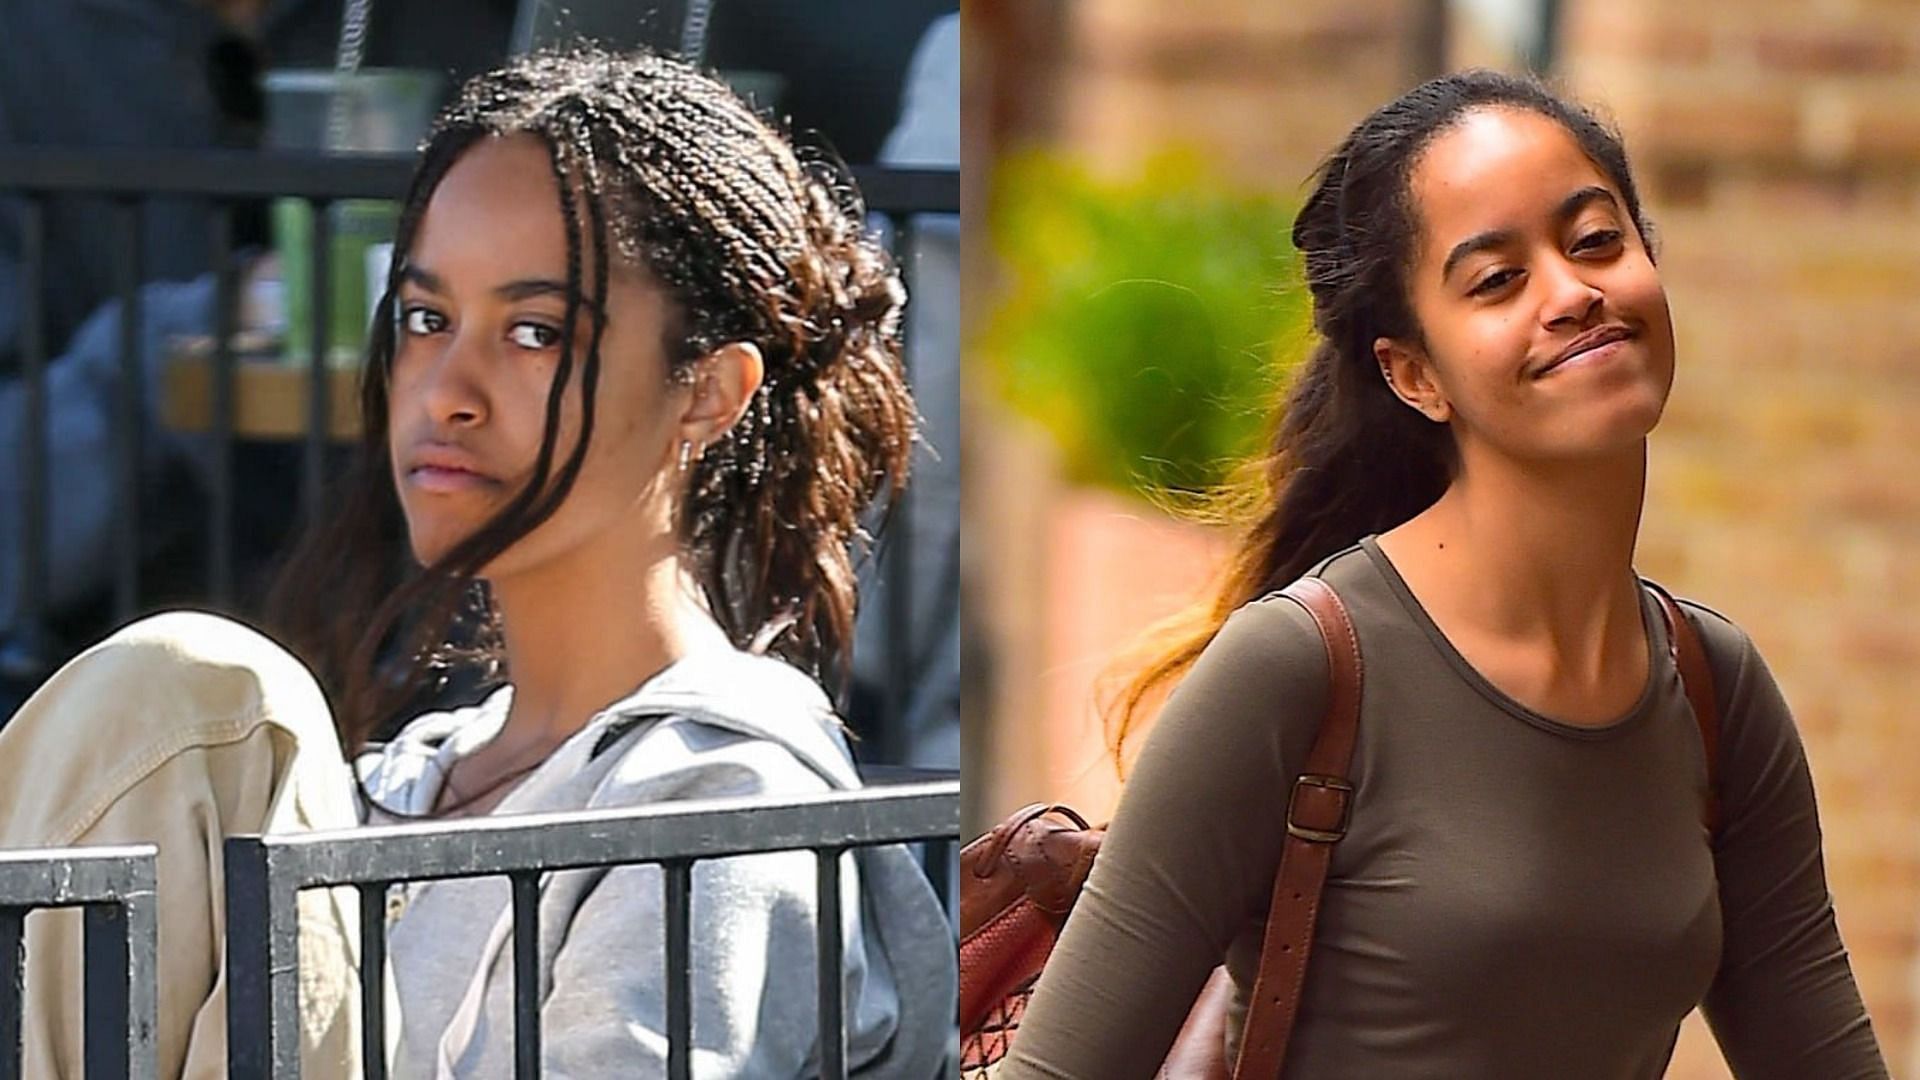 Malia Obama has been hired as a writer on Donald Glover&#039;s upcoming Amazon Prime series (Image via Bellocqimages/Getty Images and Alo Ceballos/Getty Images)